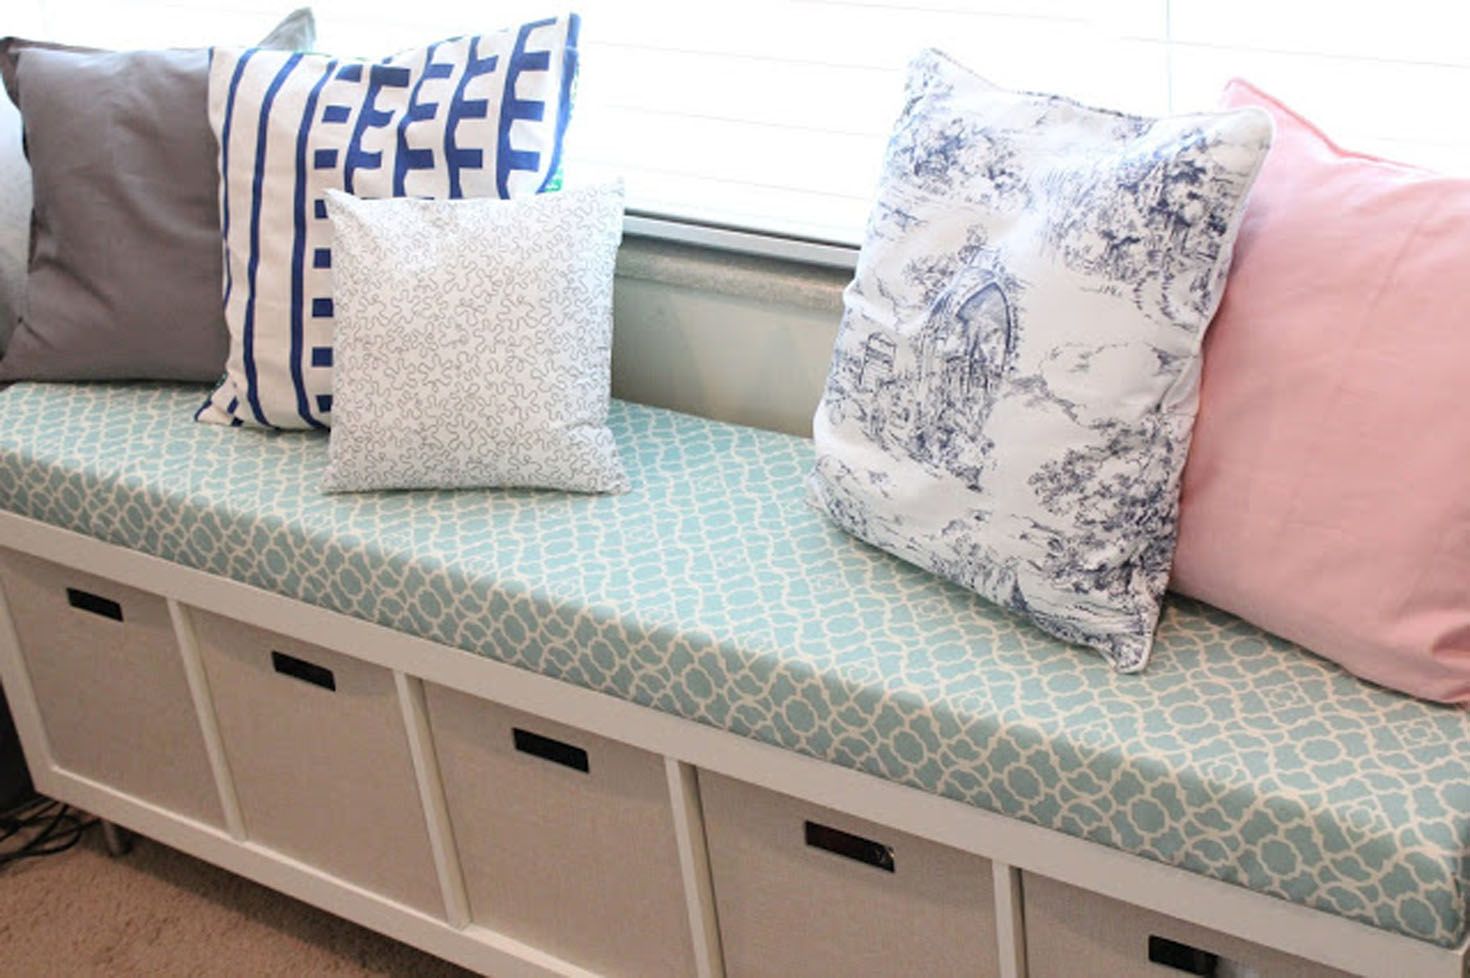 12 Easy Ways to Keep Your Bedroom Organized